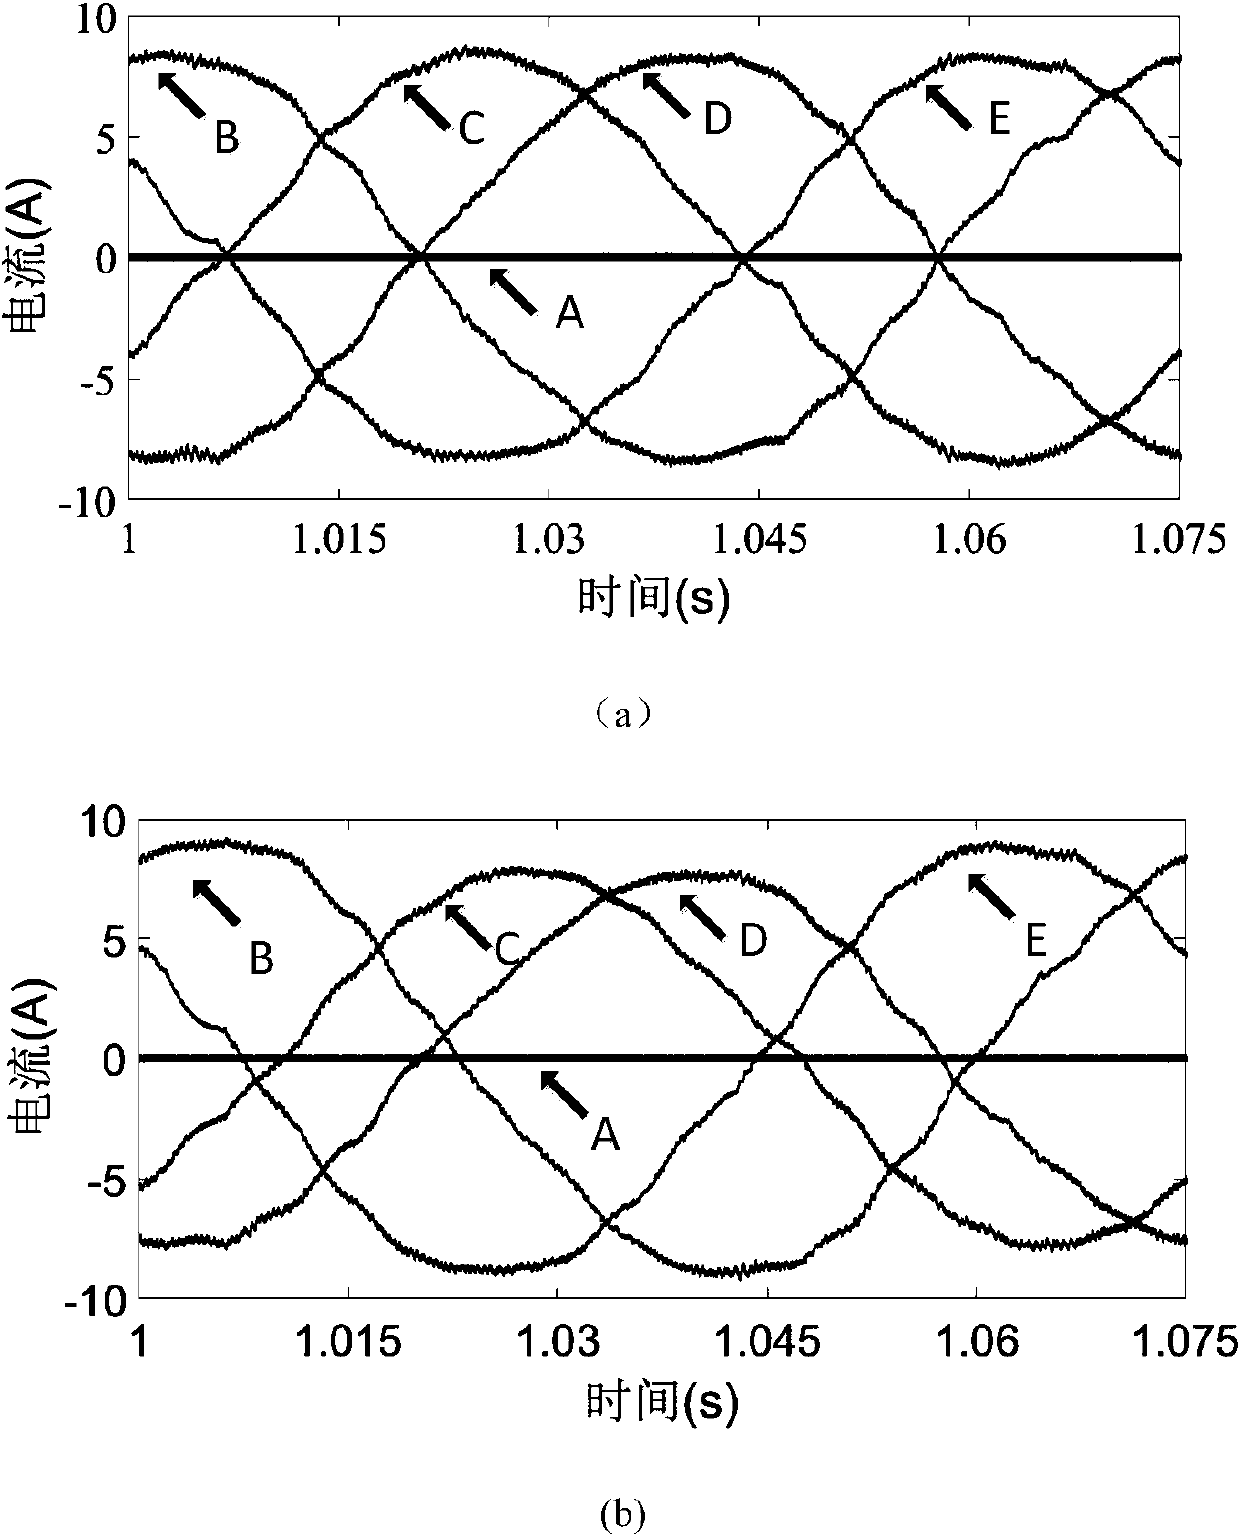 A fault-tolerant control method for maximum torque-current ratio mtpa of five-phase permanent magnet motor considering reluctance torque